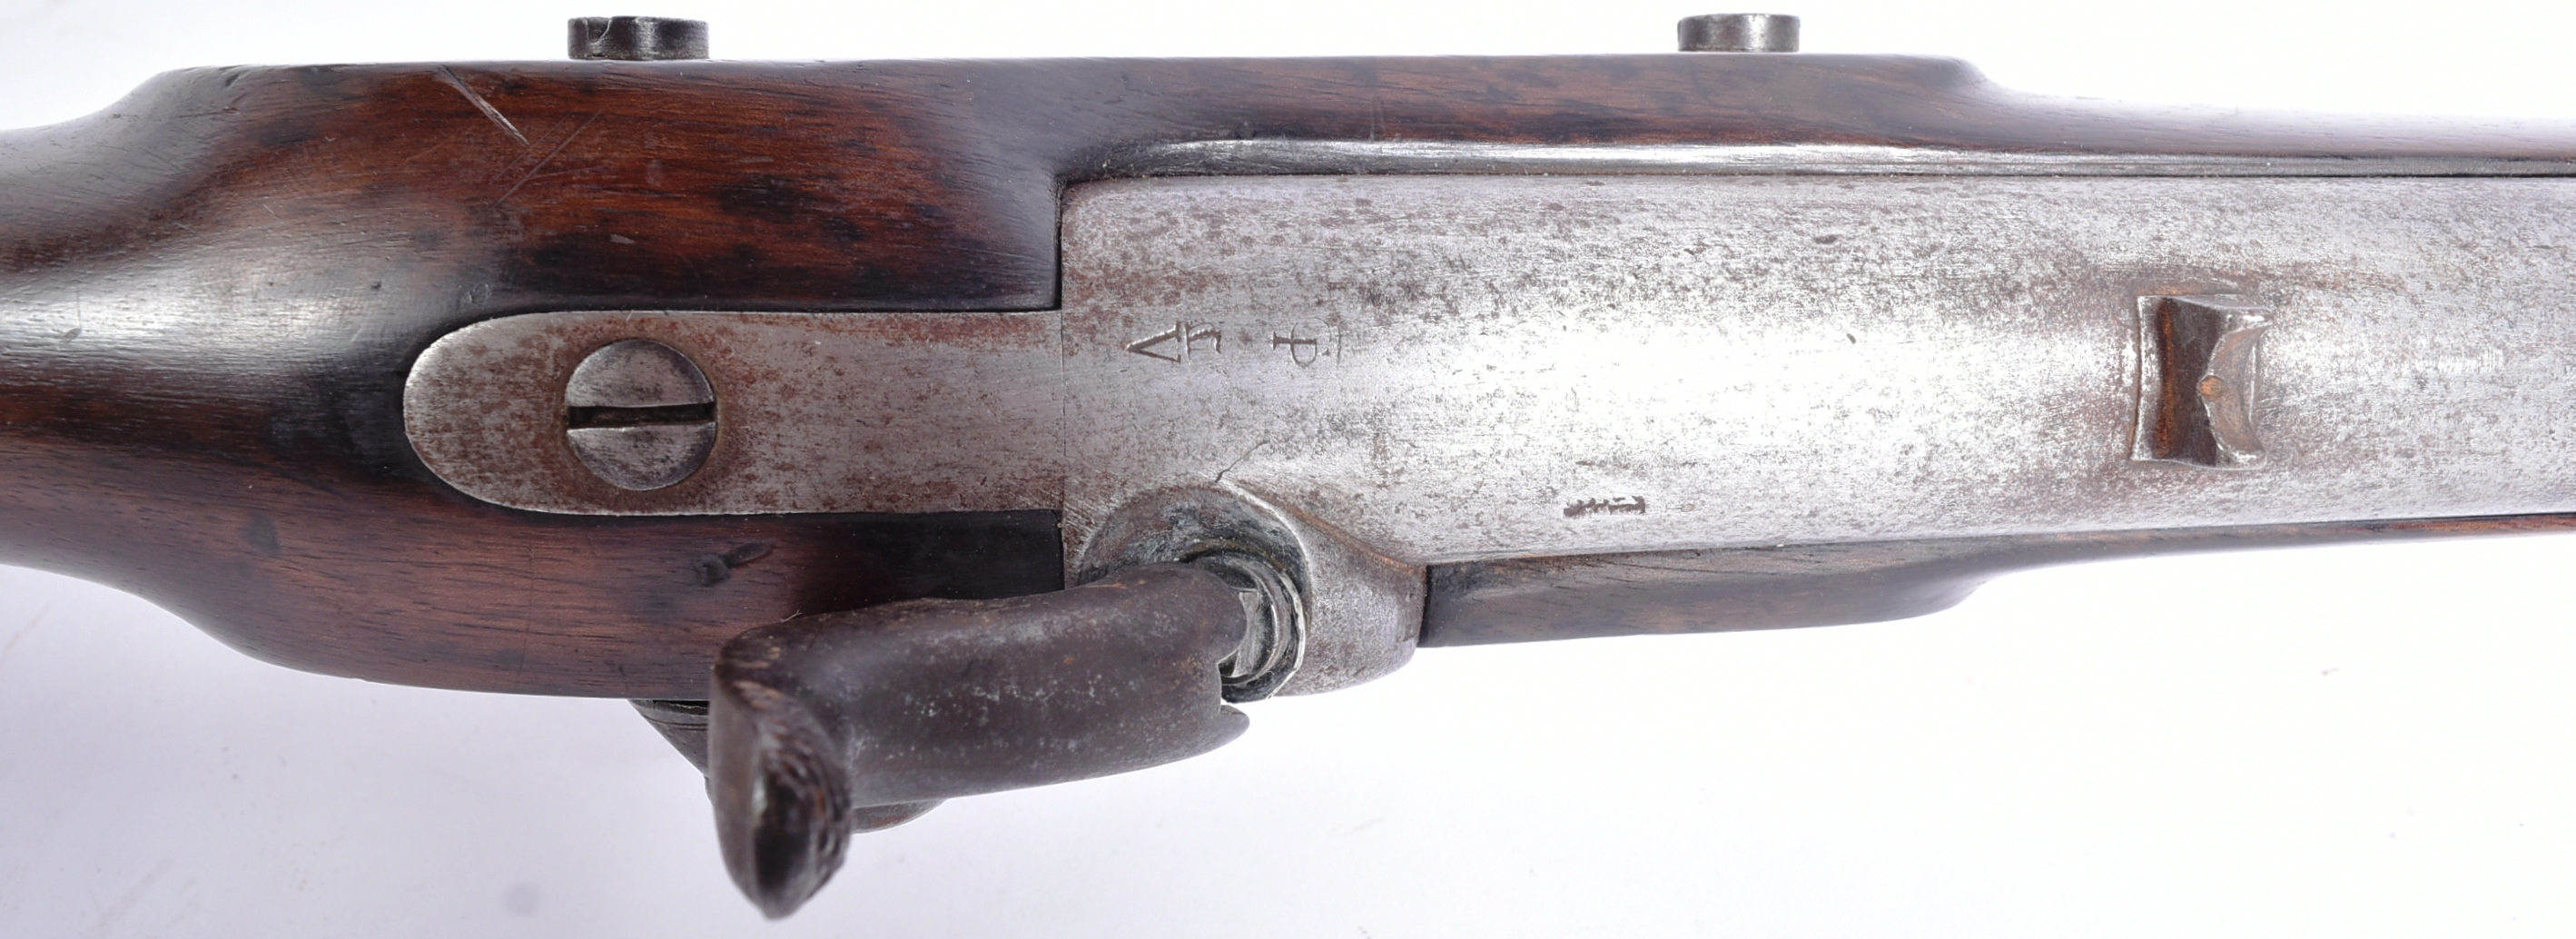 ARMS - 19TH CENTURY EAST INDIA COMPANY PERCUSSION MUSKET - Image 4 of 5